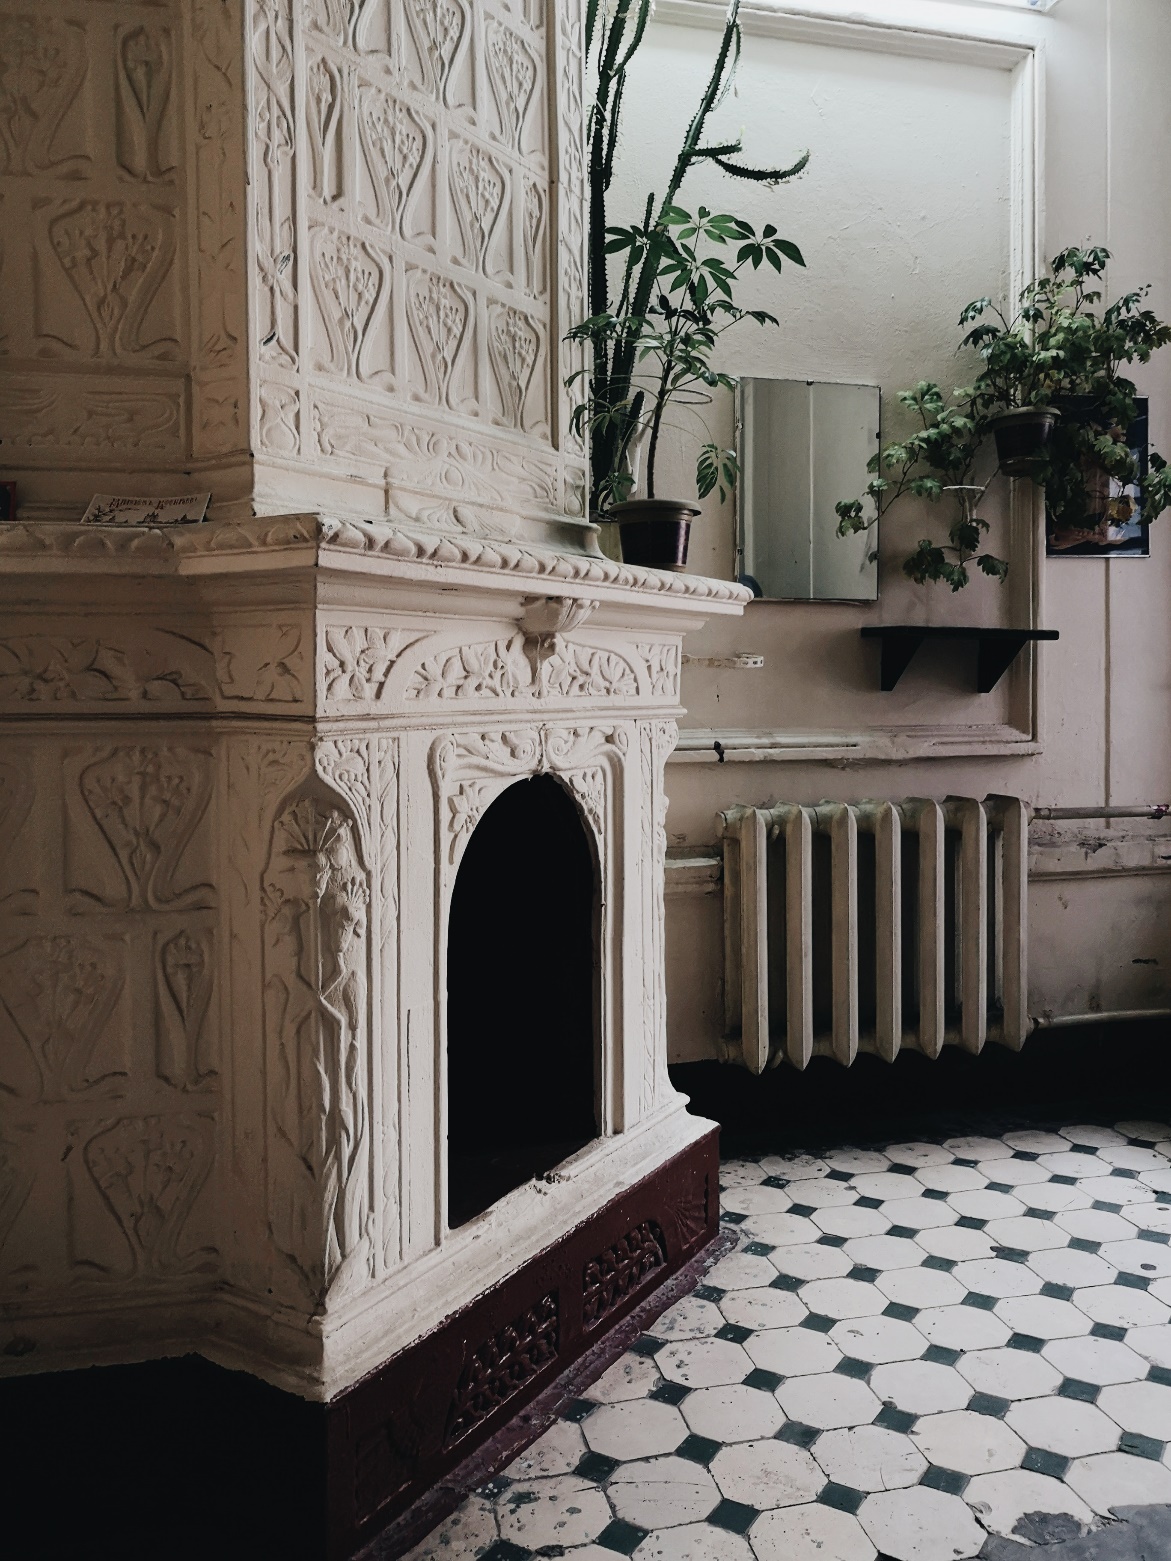 An ornate fireplace in a room.